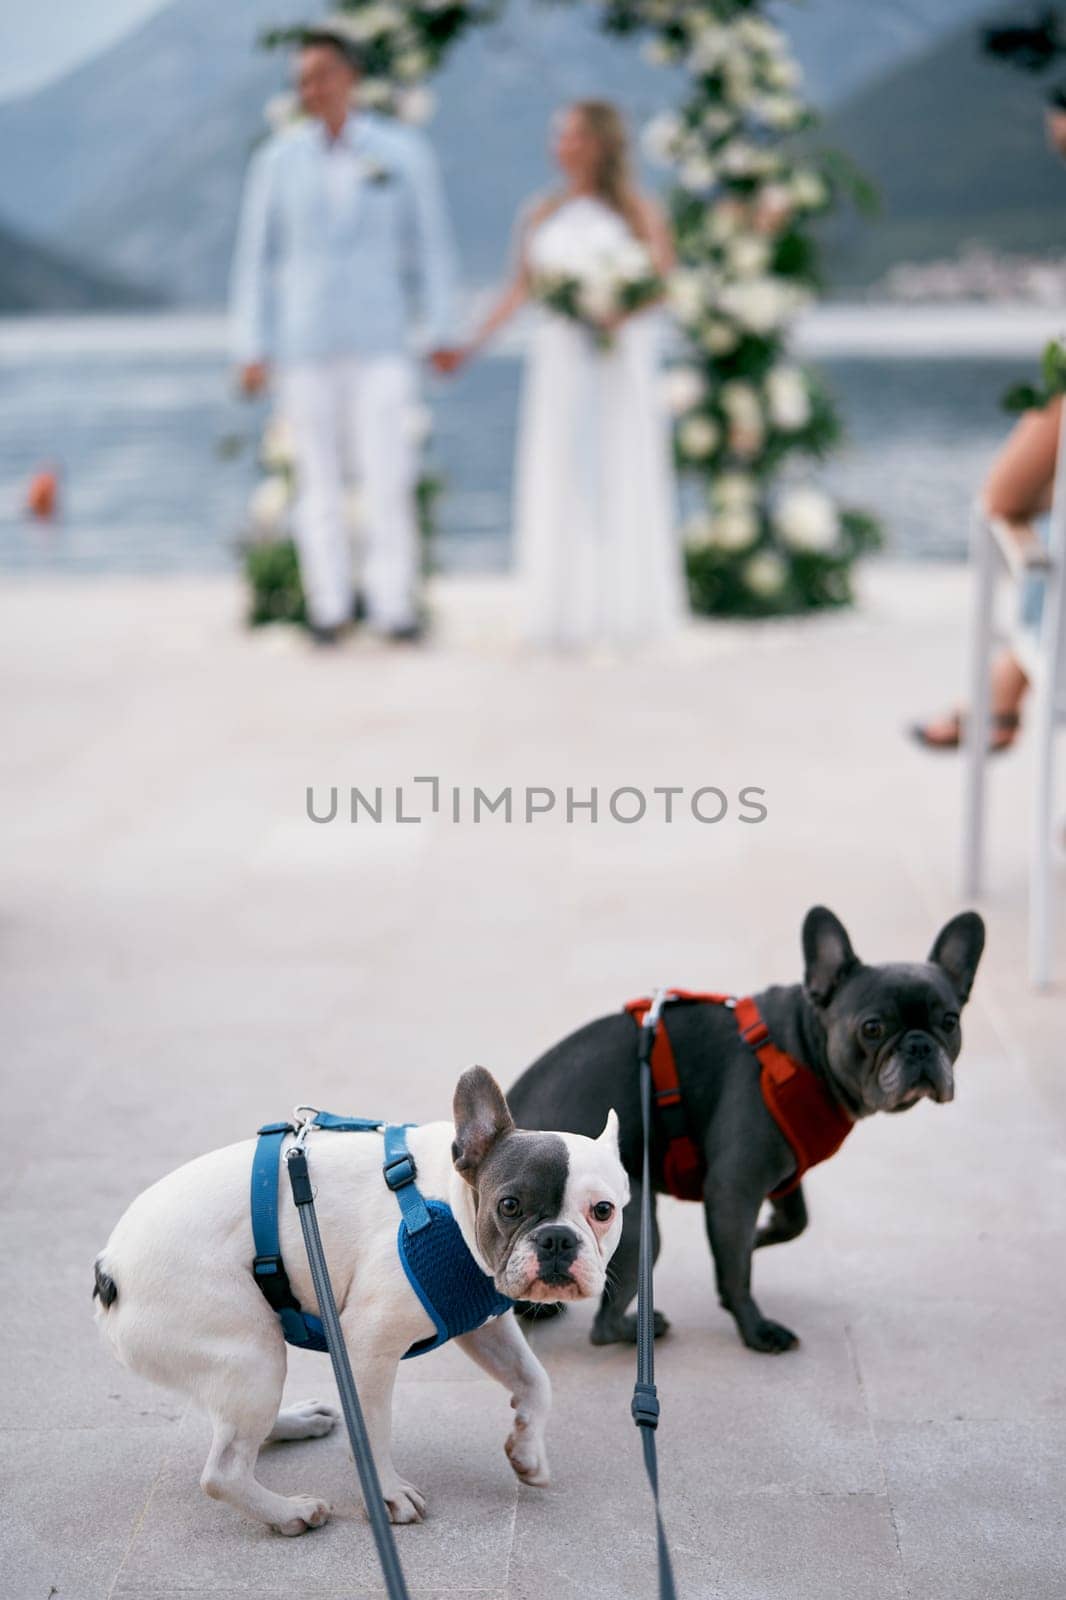 French bulldog puppies on leashes with belts sit on the ground. High quality photo